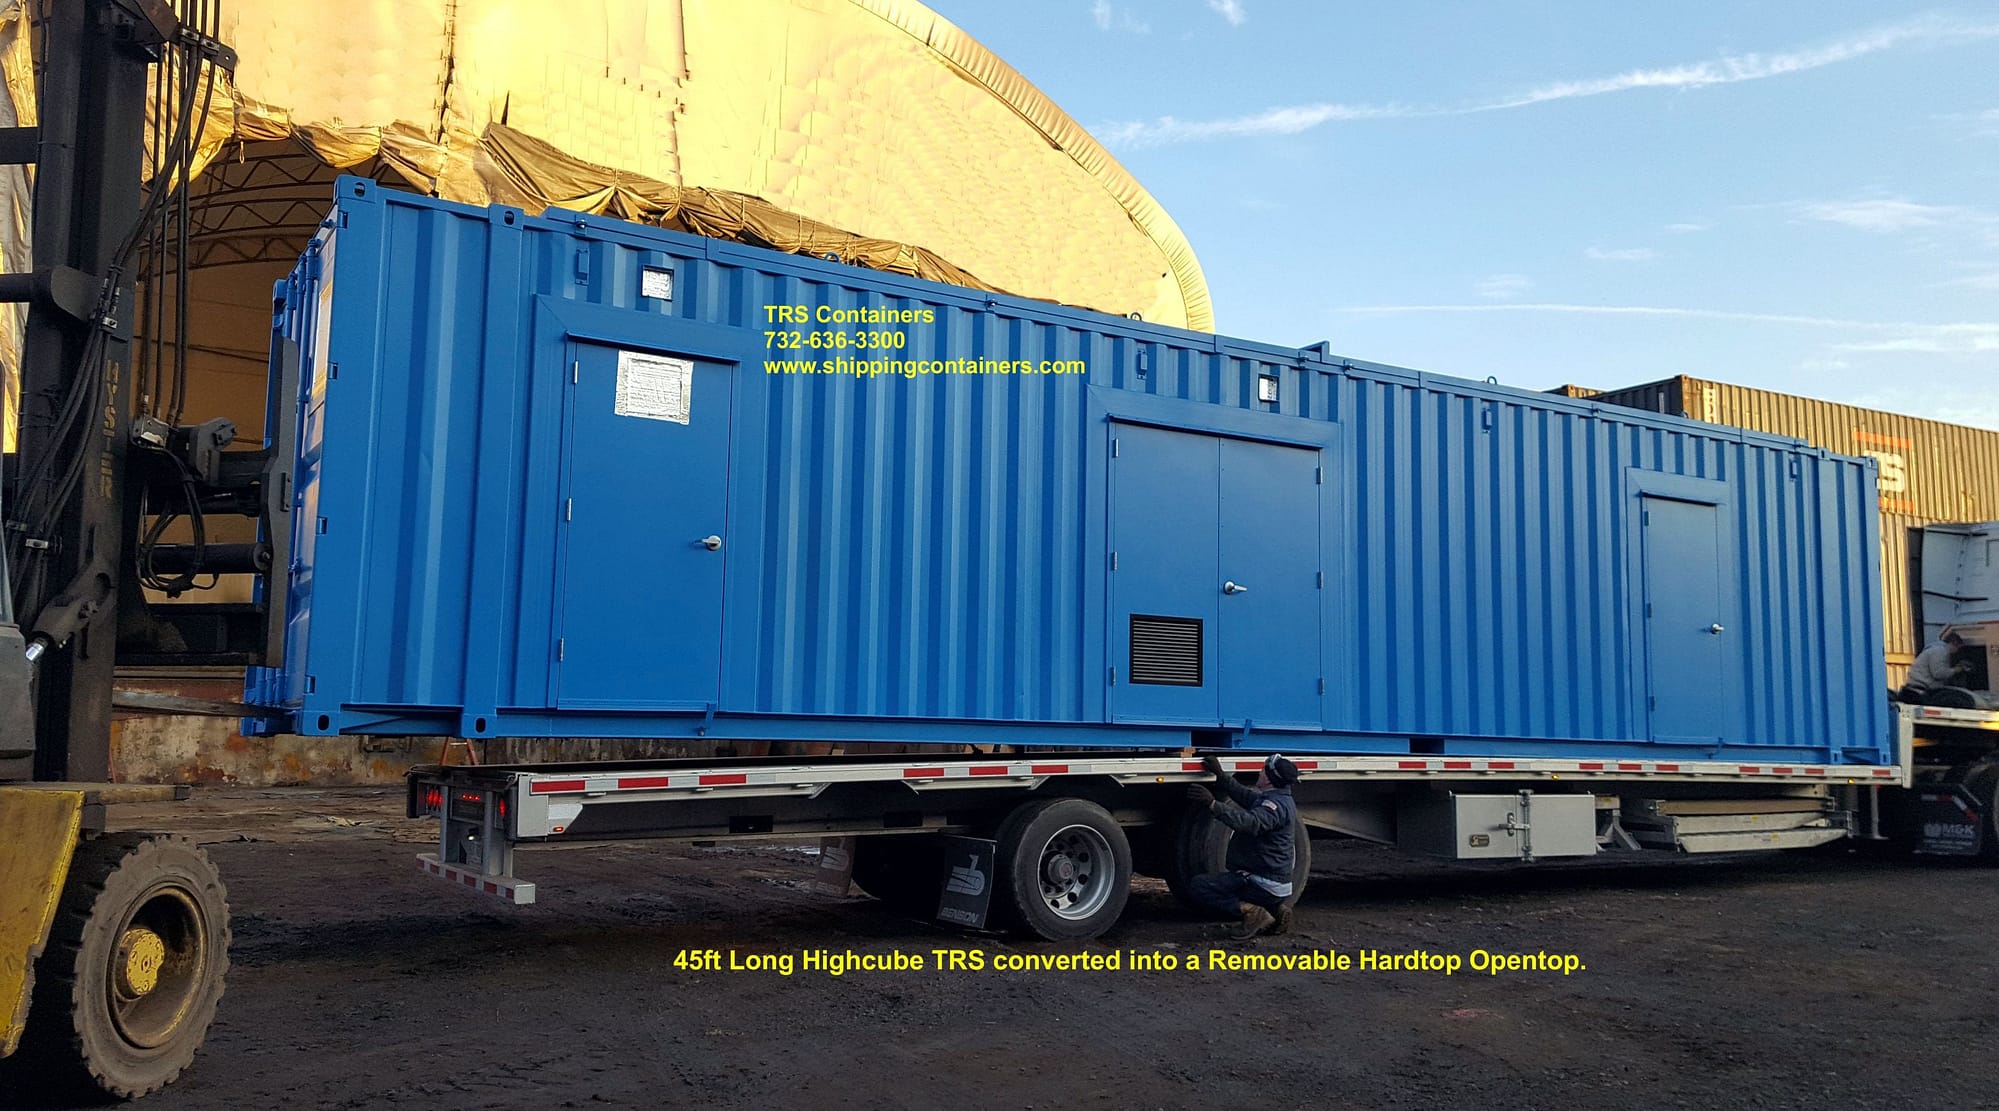 BioGas System housed in a 45ft Long Modified TRS Container